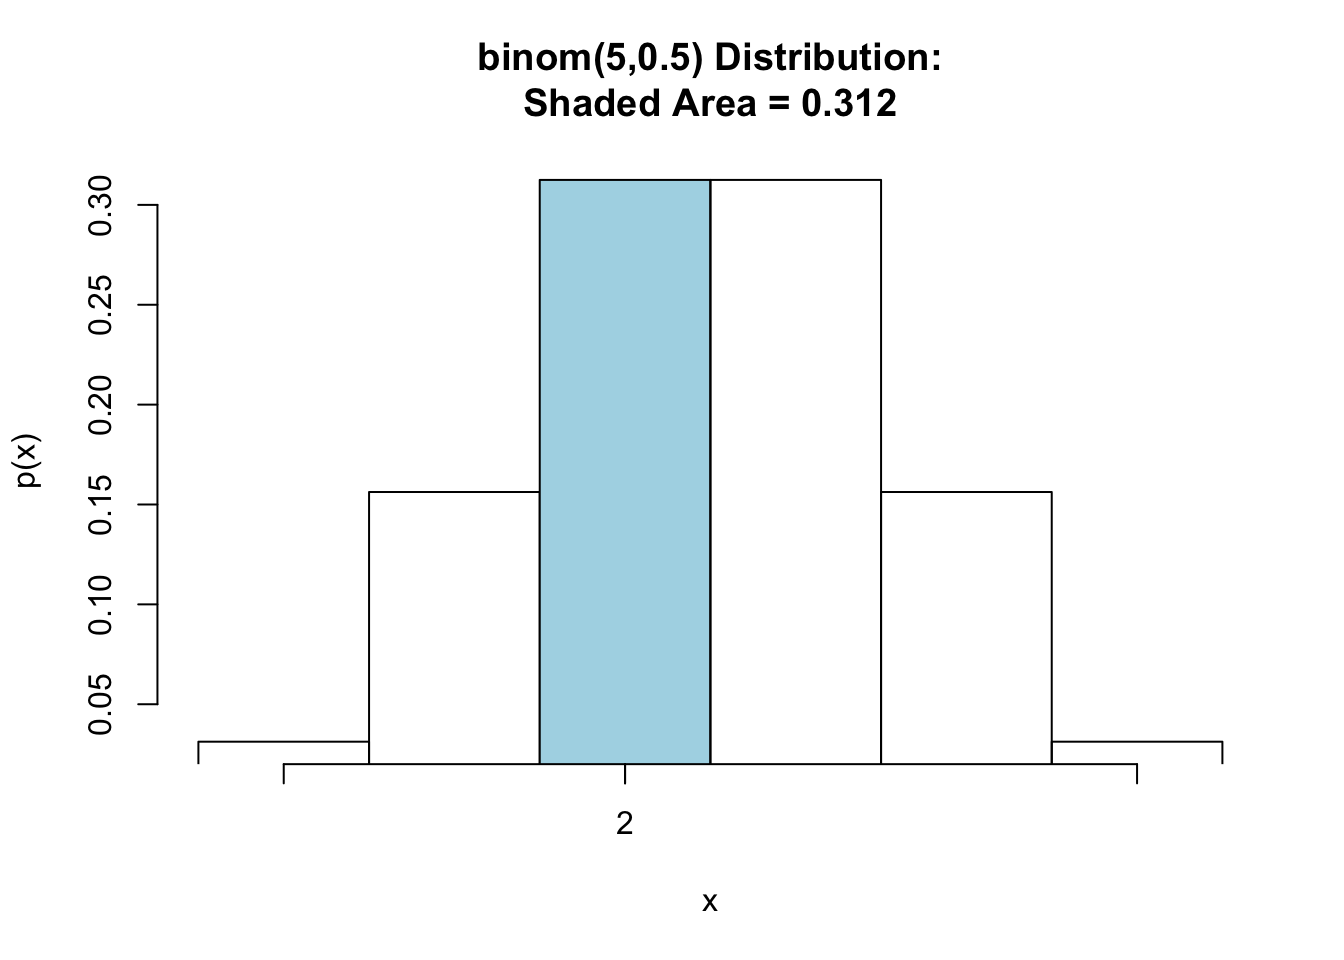 Binomial Equal:  Shaded region represents the probability that exactly 2 heads are tossed in 5 tosses of a fair coin.